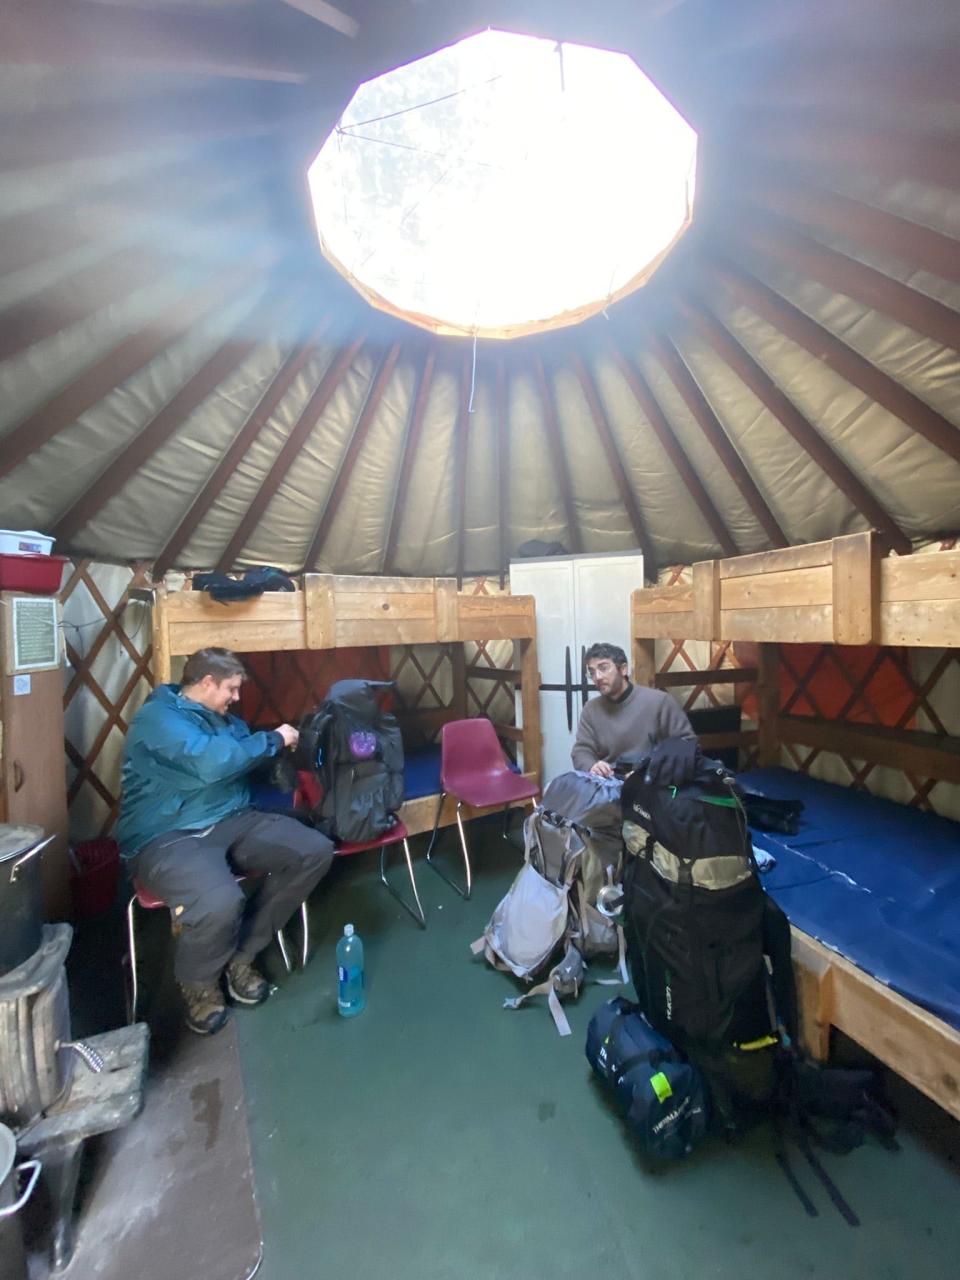 Visitors unpack gear inside a Never Summer Nordic yurt at Colorado State Forest State Park in this undated photo. Colorado Parks and Wildlife has terminated its contract with the company, leaving customers searching for refunds.